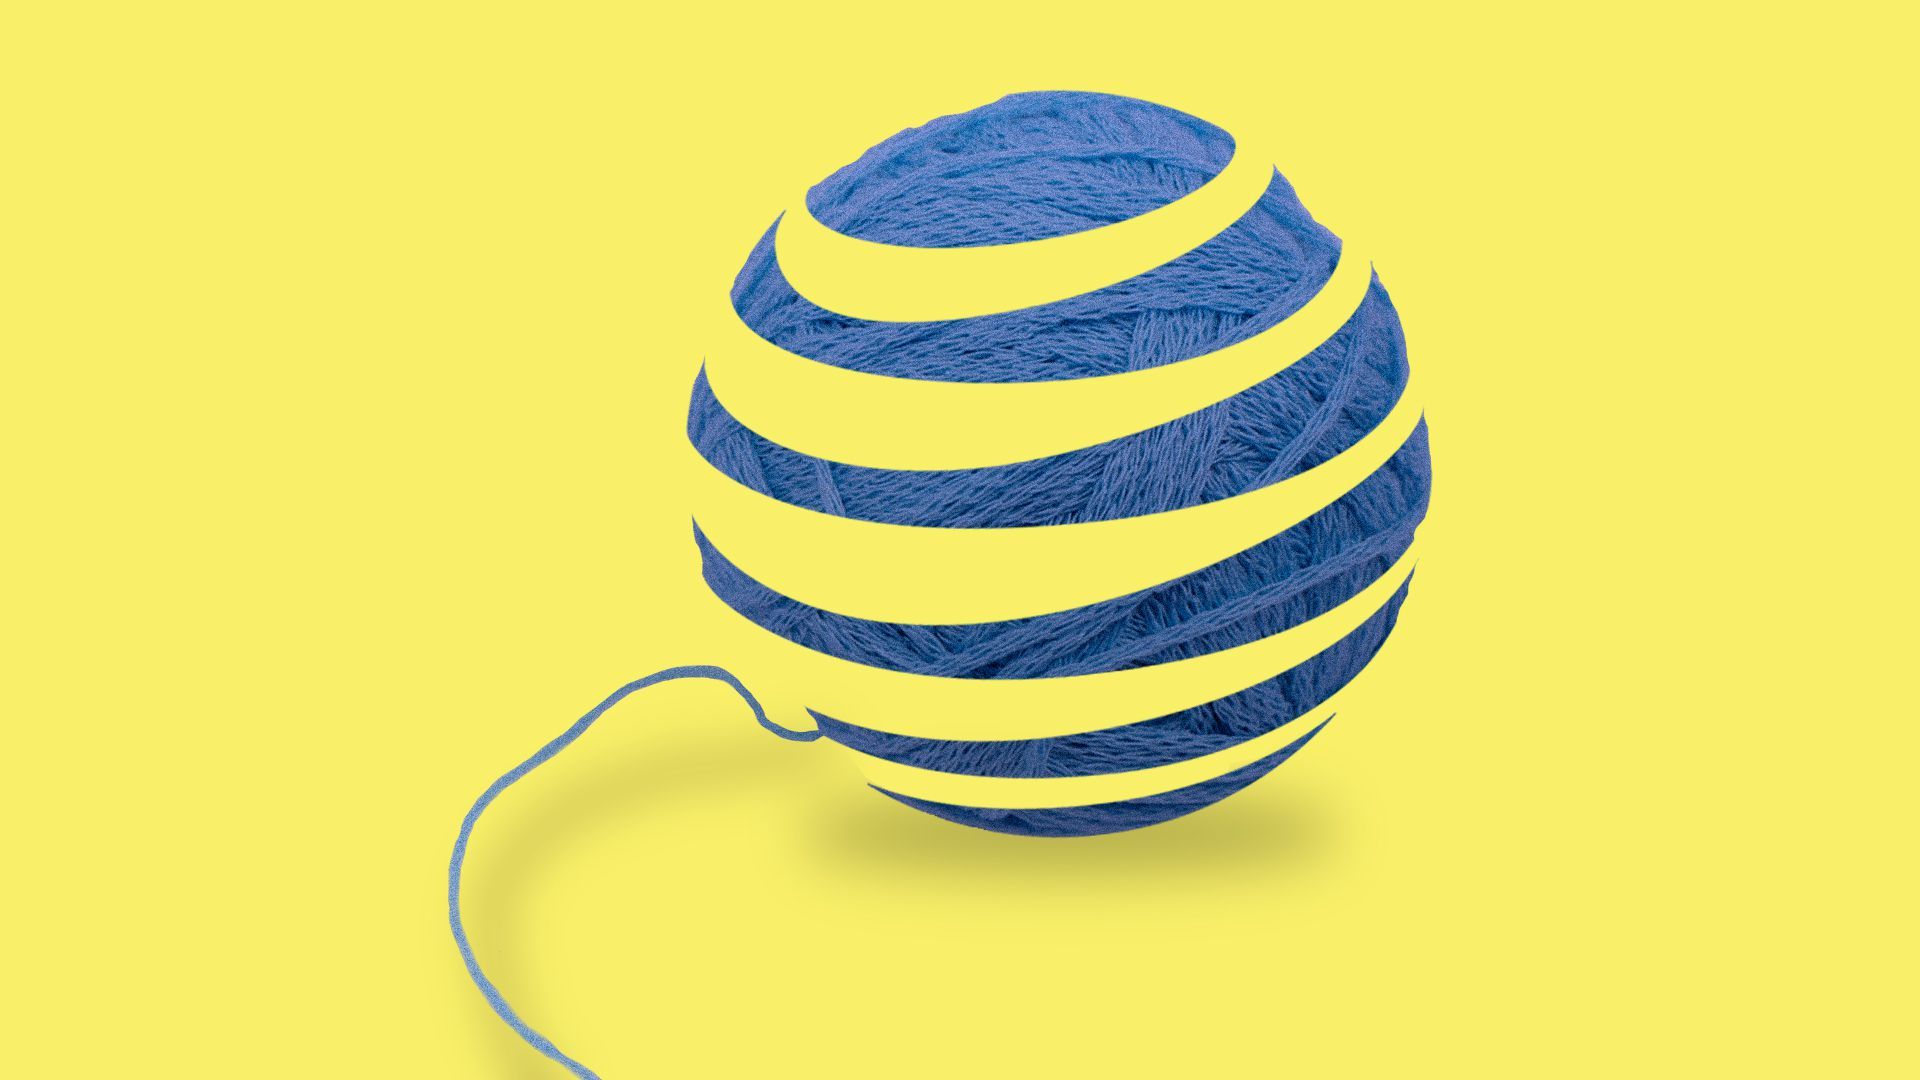 AT&T logo unspooling.